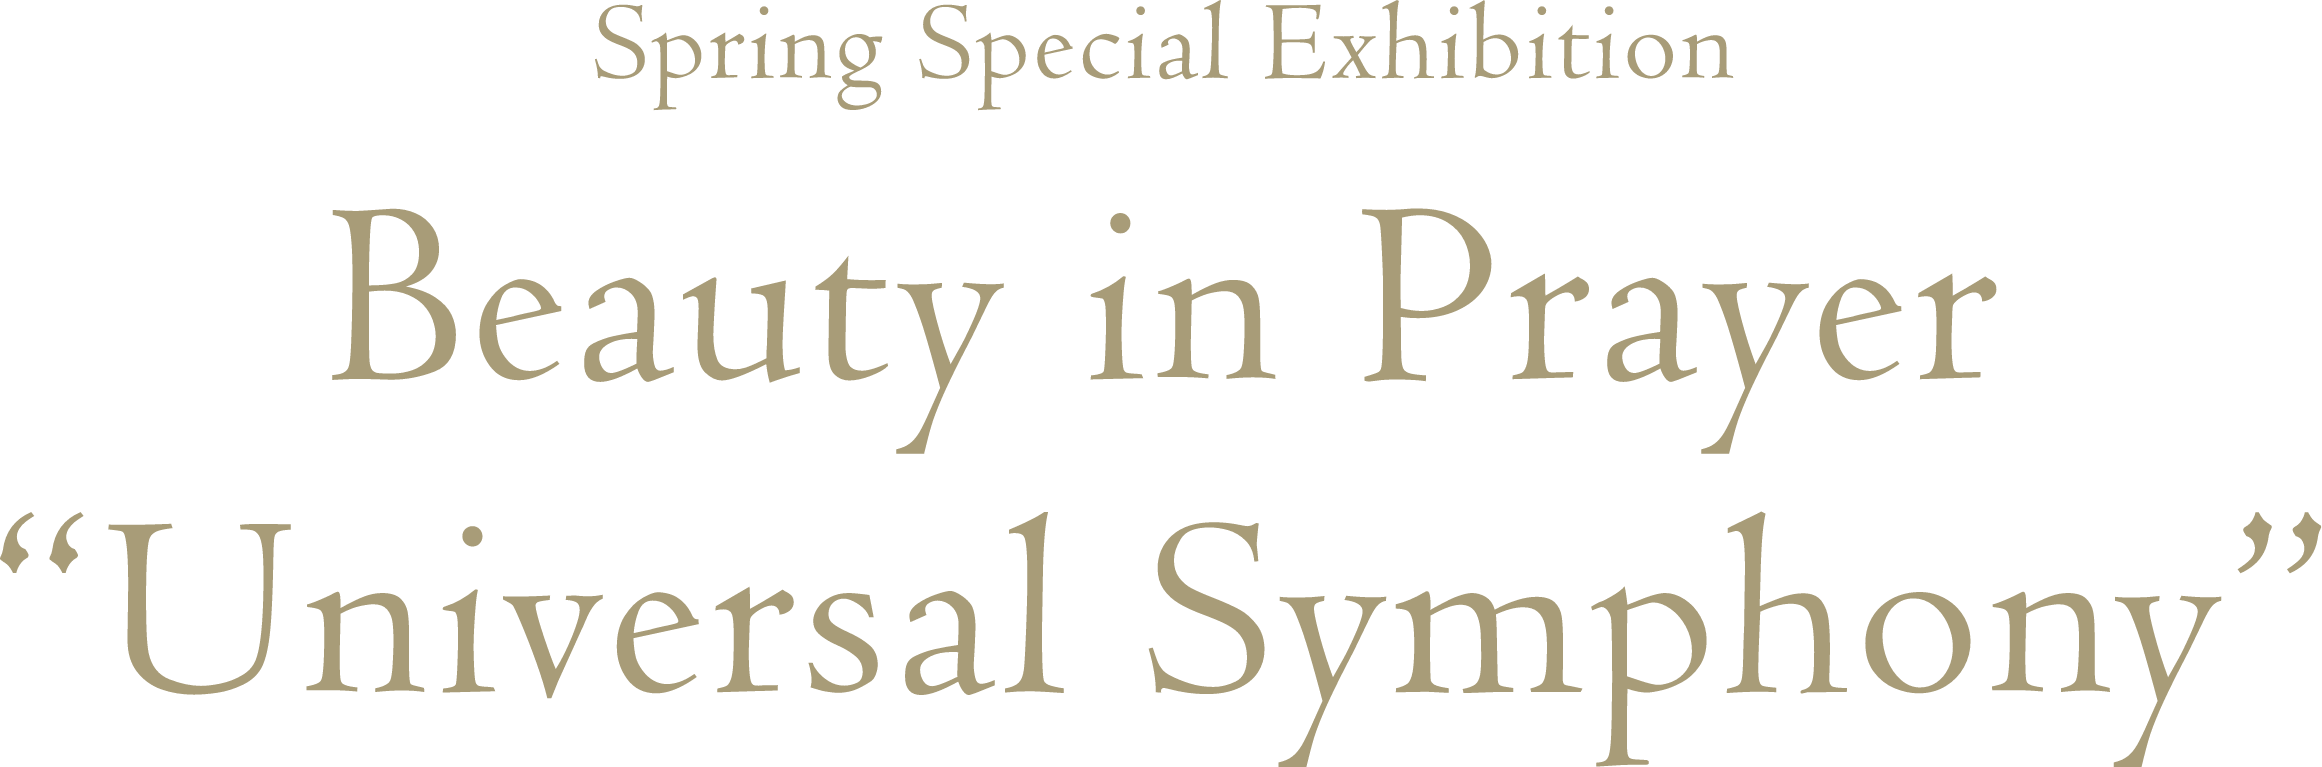 Spring Special Exhibition Beauty in Prayer: Universal Symphony